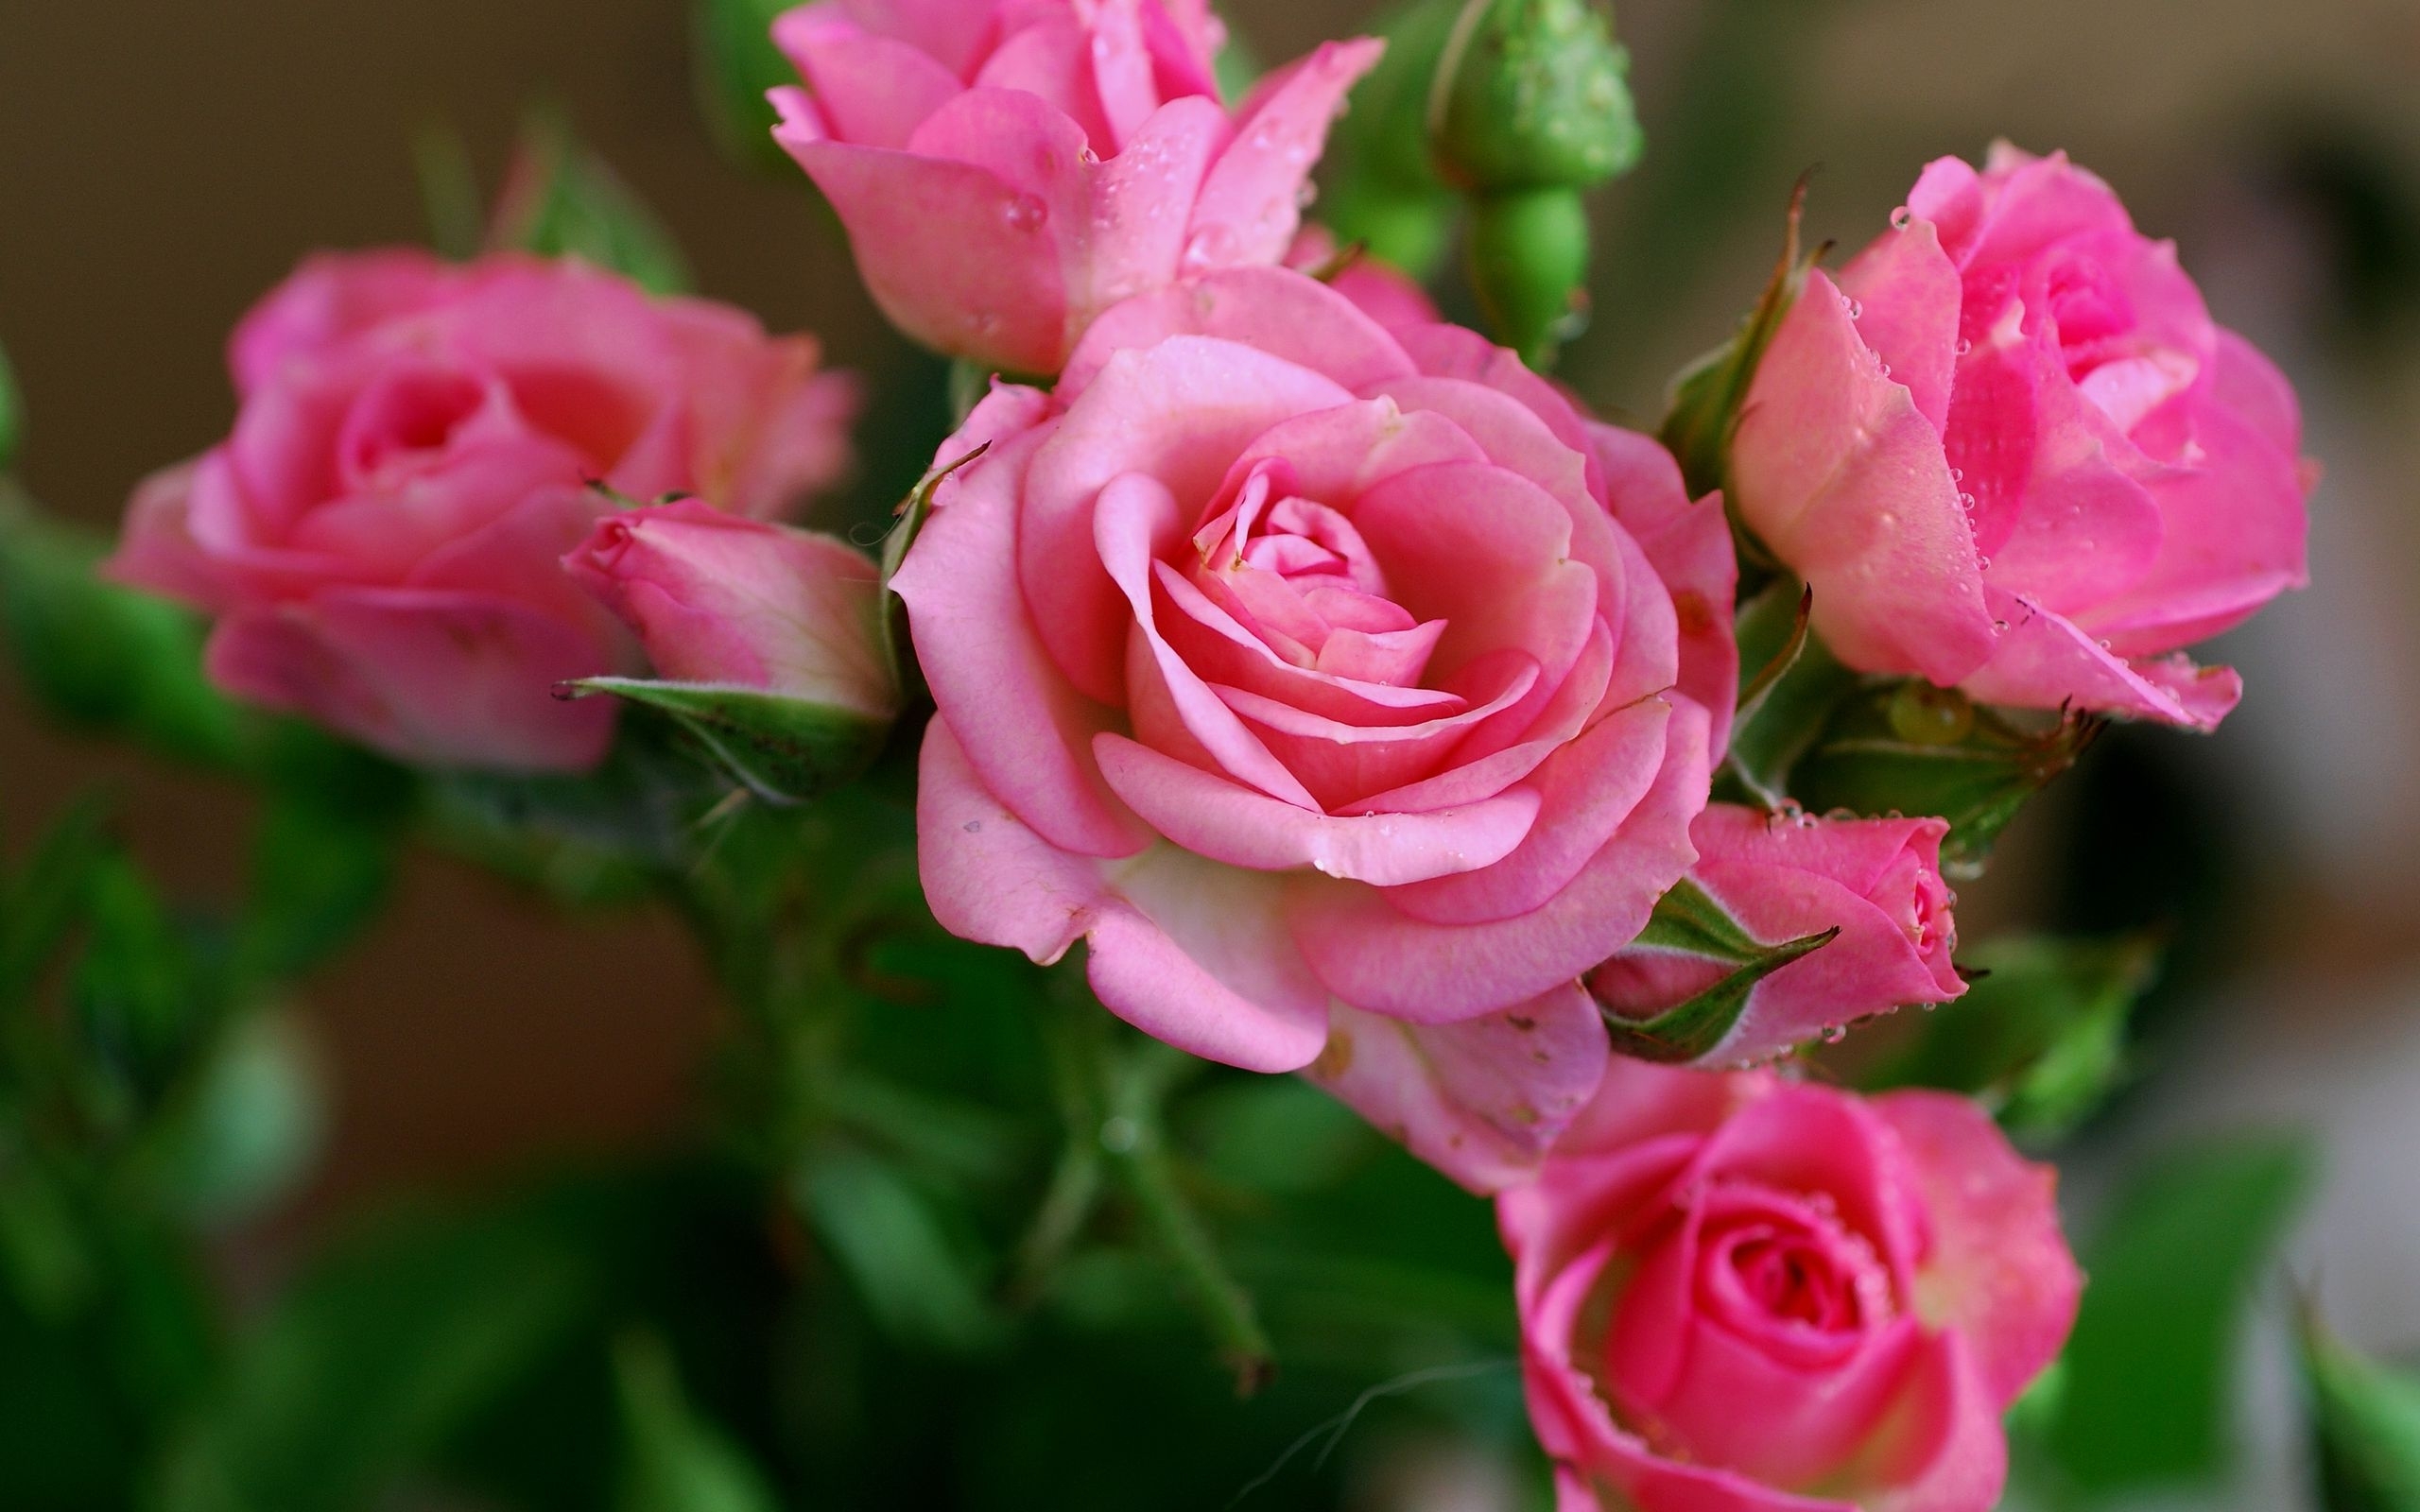  Pink rose flowers Nature wallpapers free download HD Wallpapers for